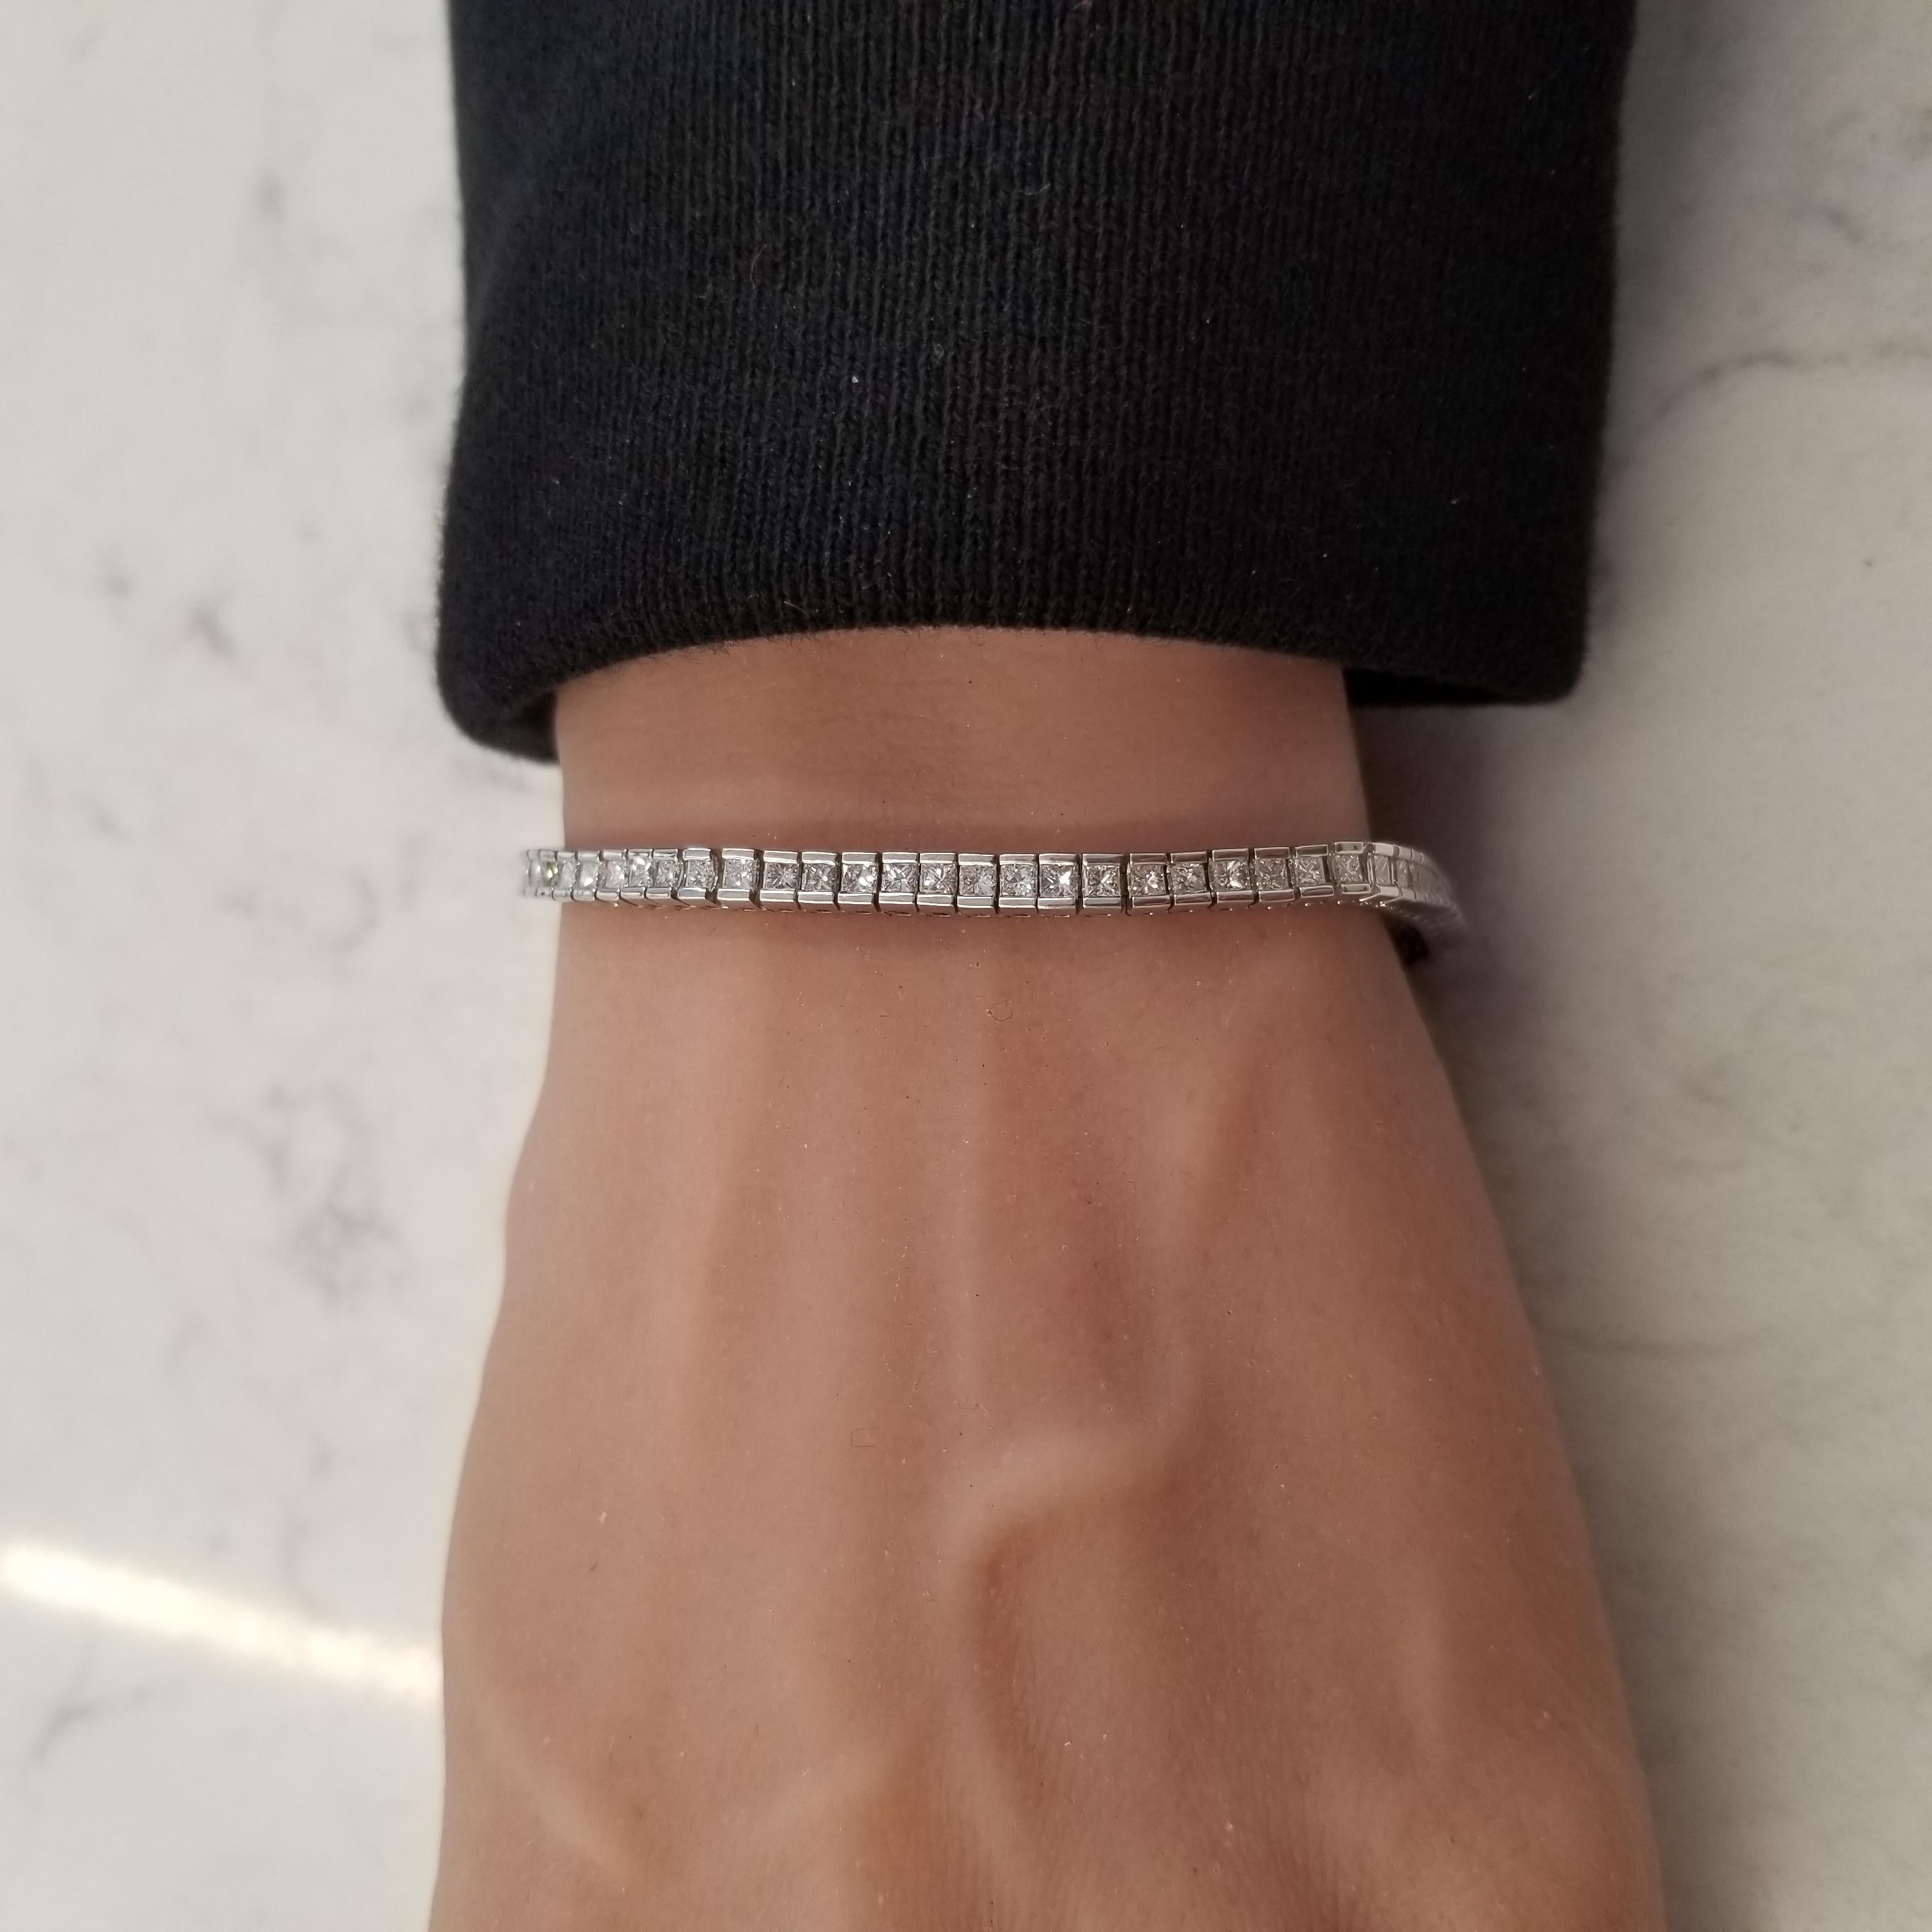 Every stylish lady needs a magnificent diamond bracelet and This. Is. It! This bracelet proudly boasts an astounding 3.62 carat total weight comprised of 77 princess-cut diamonds wrapping gracefully around your wrist. Diamonds are G in color and